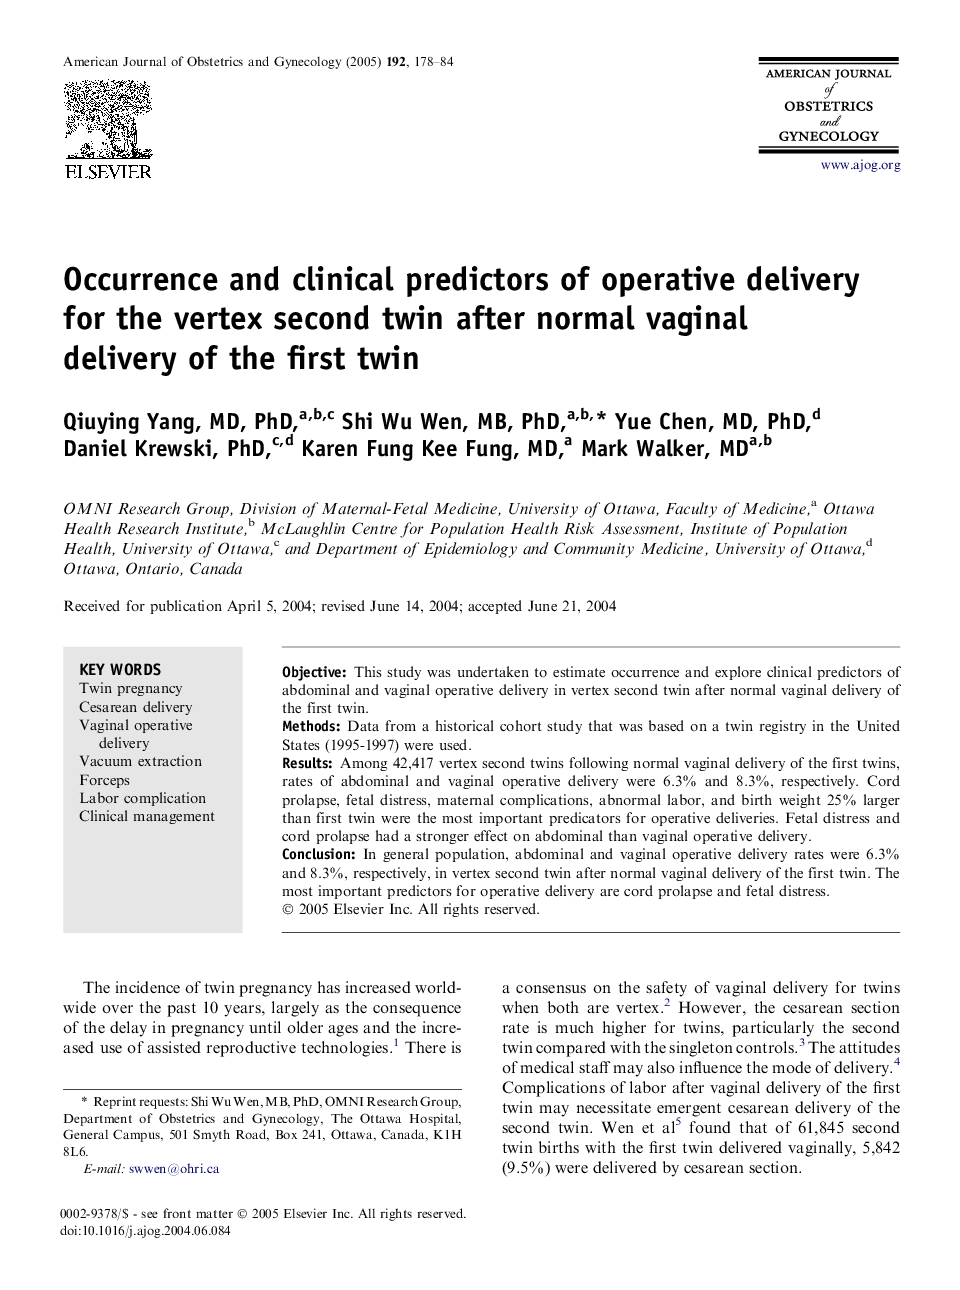 Occurrence and clinical predictors of operative delivery for the vertex second twin after normal vaginal delivery of the first twin